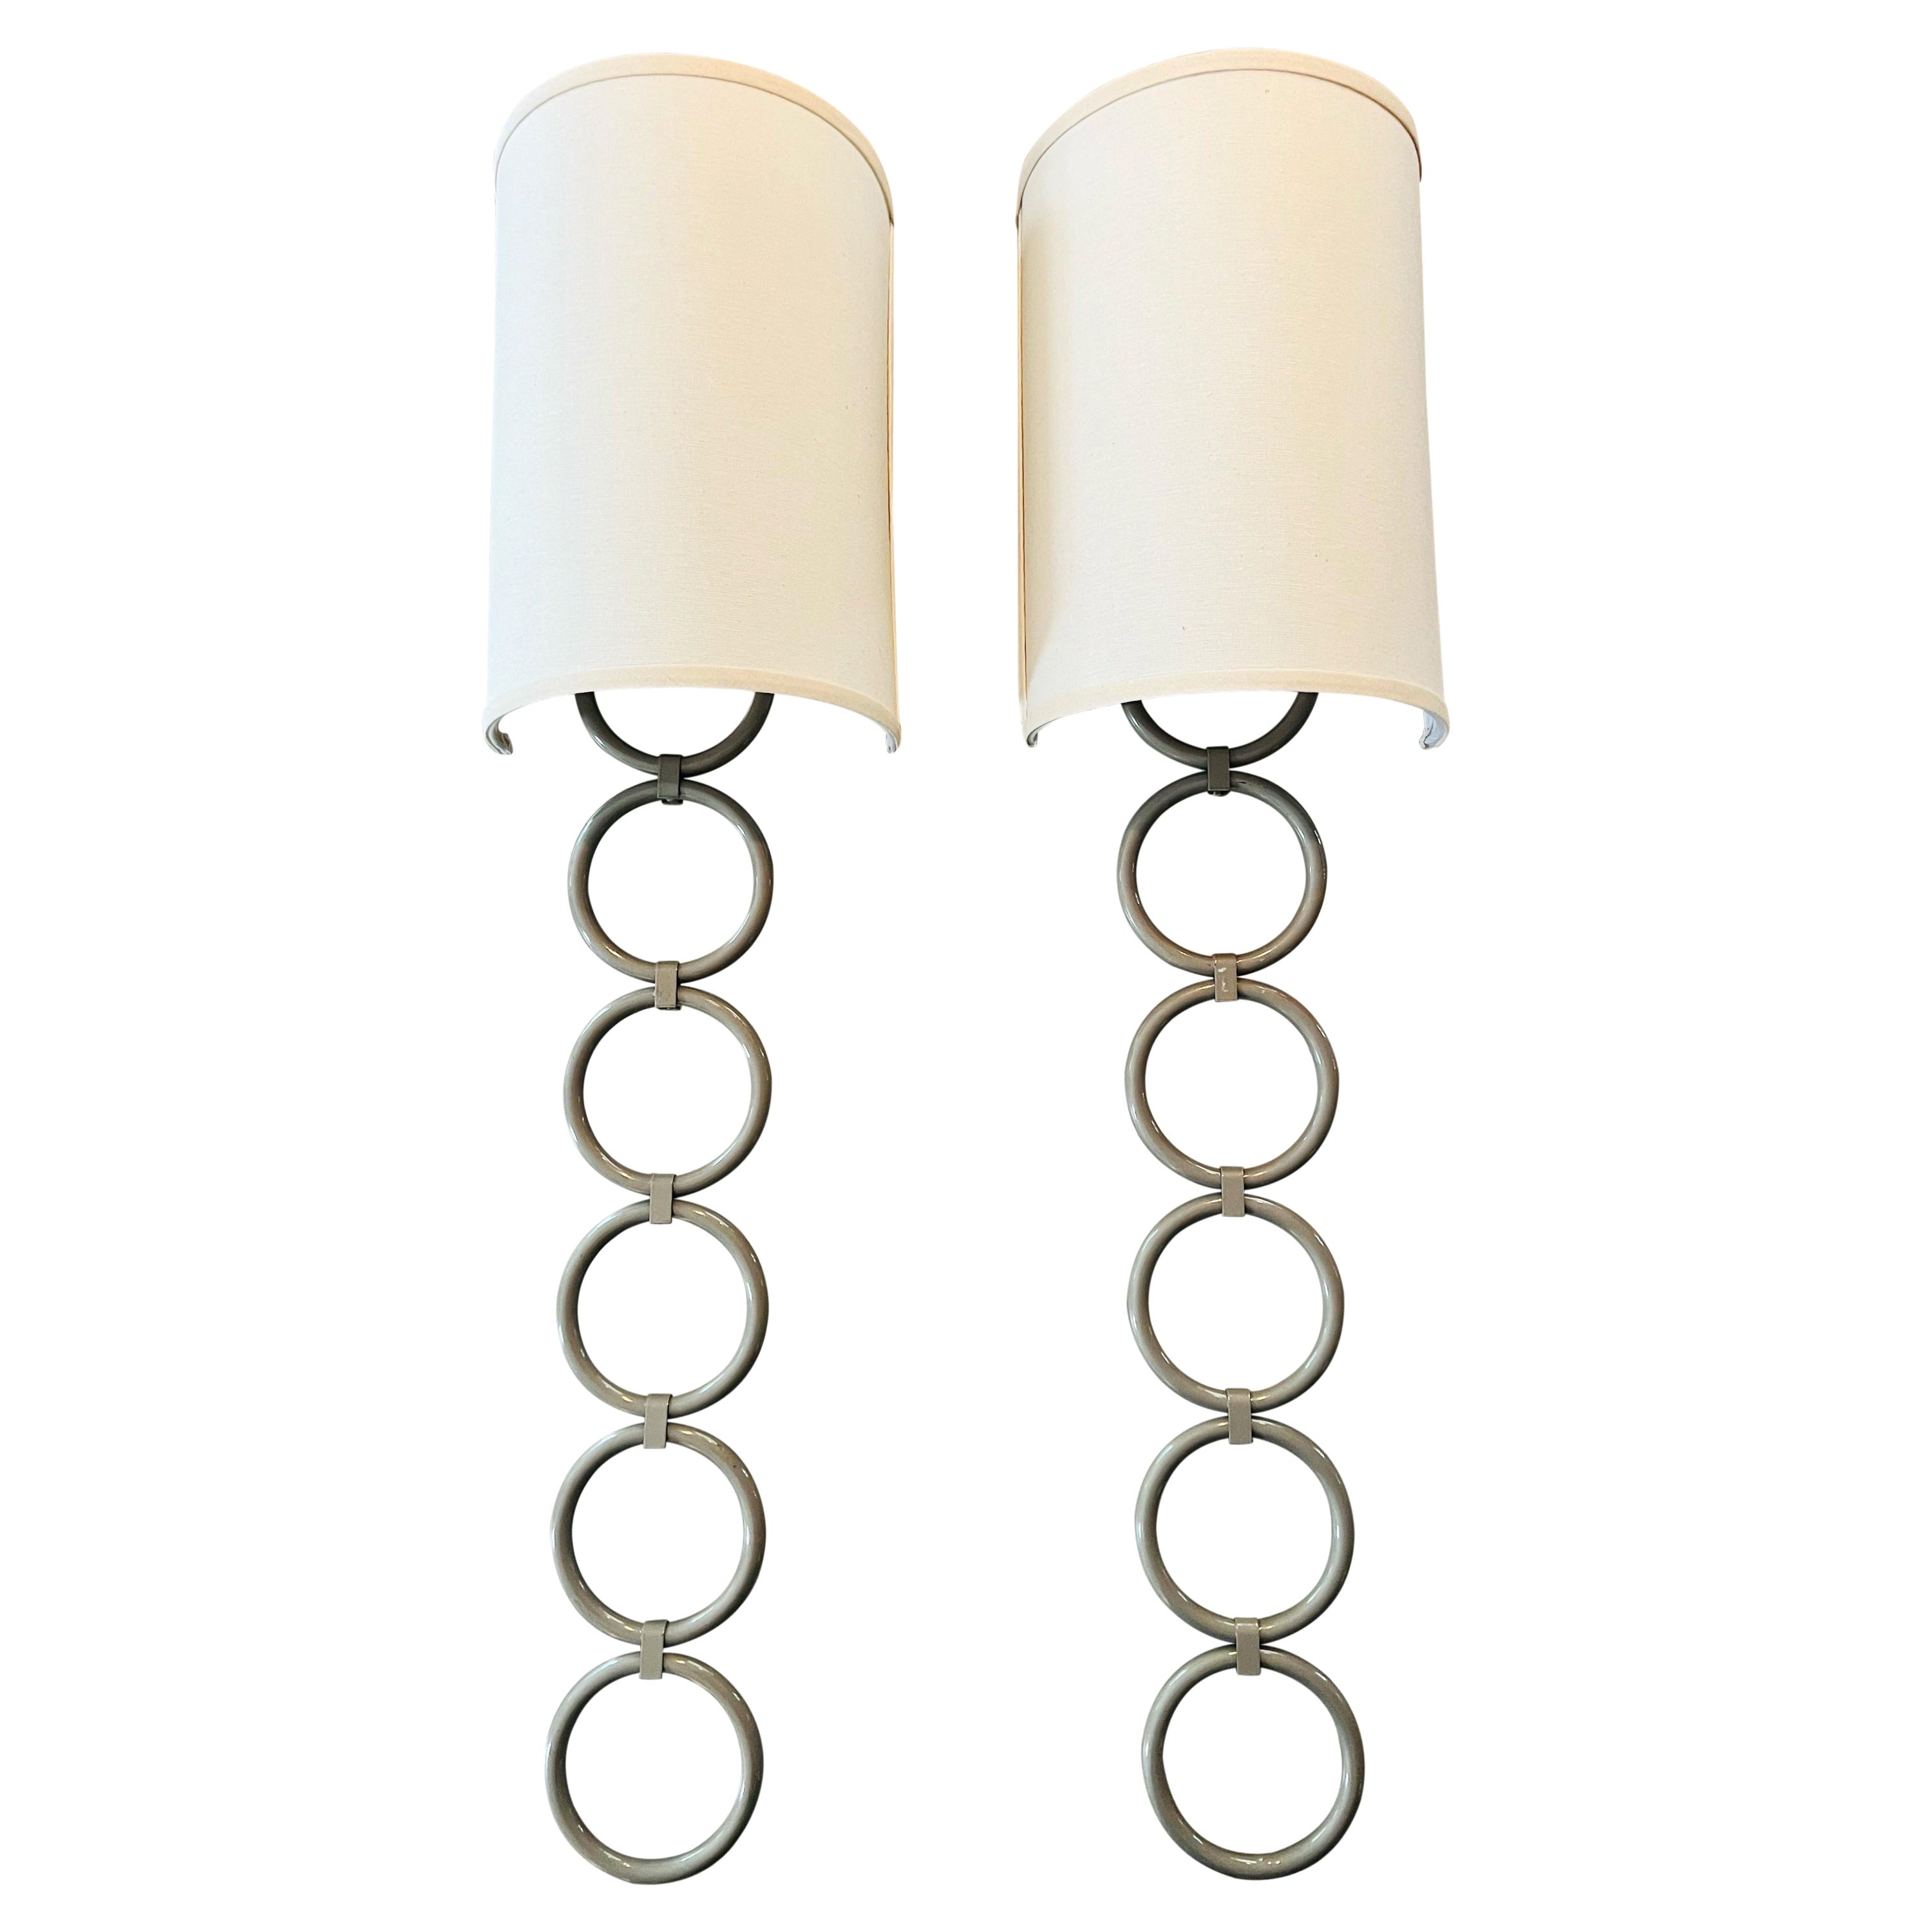 Chanel Inspired Tall Wall Sconces